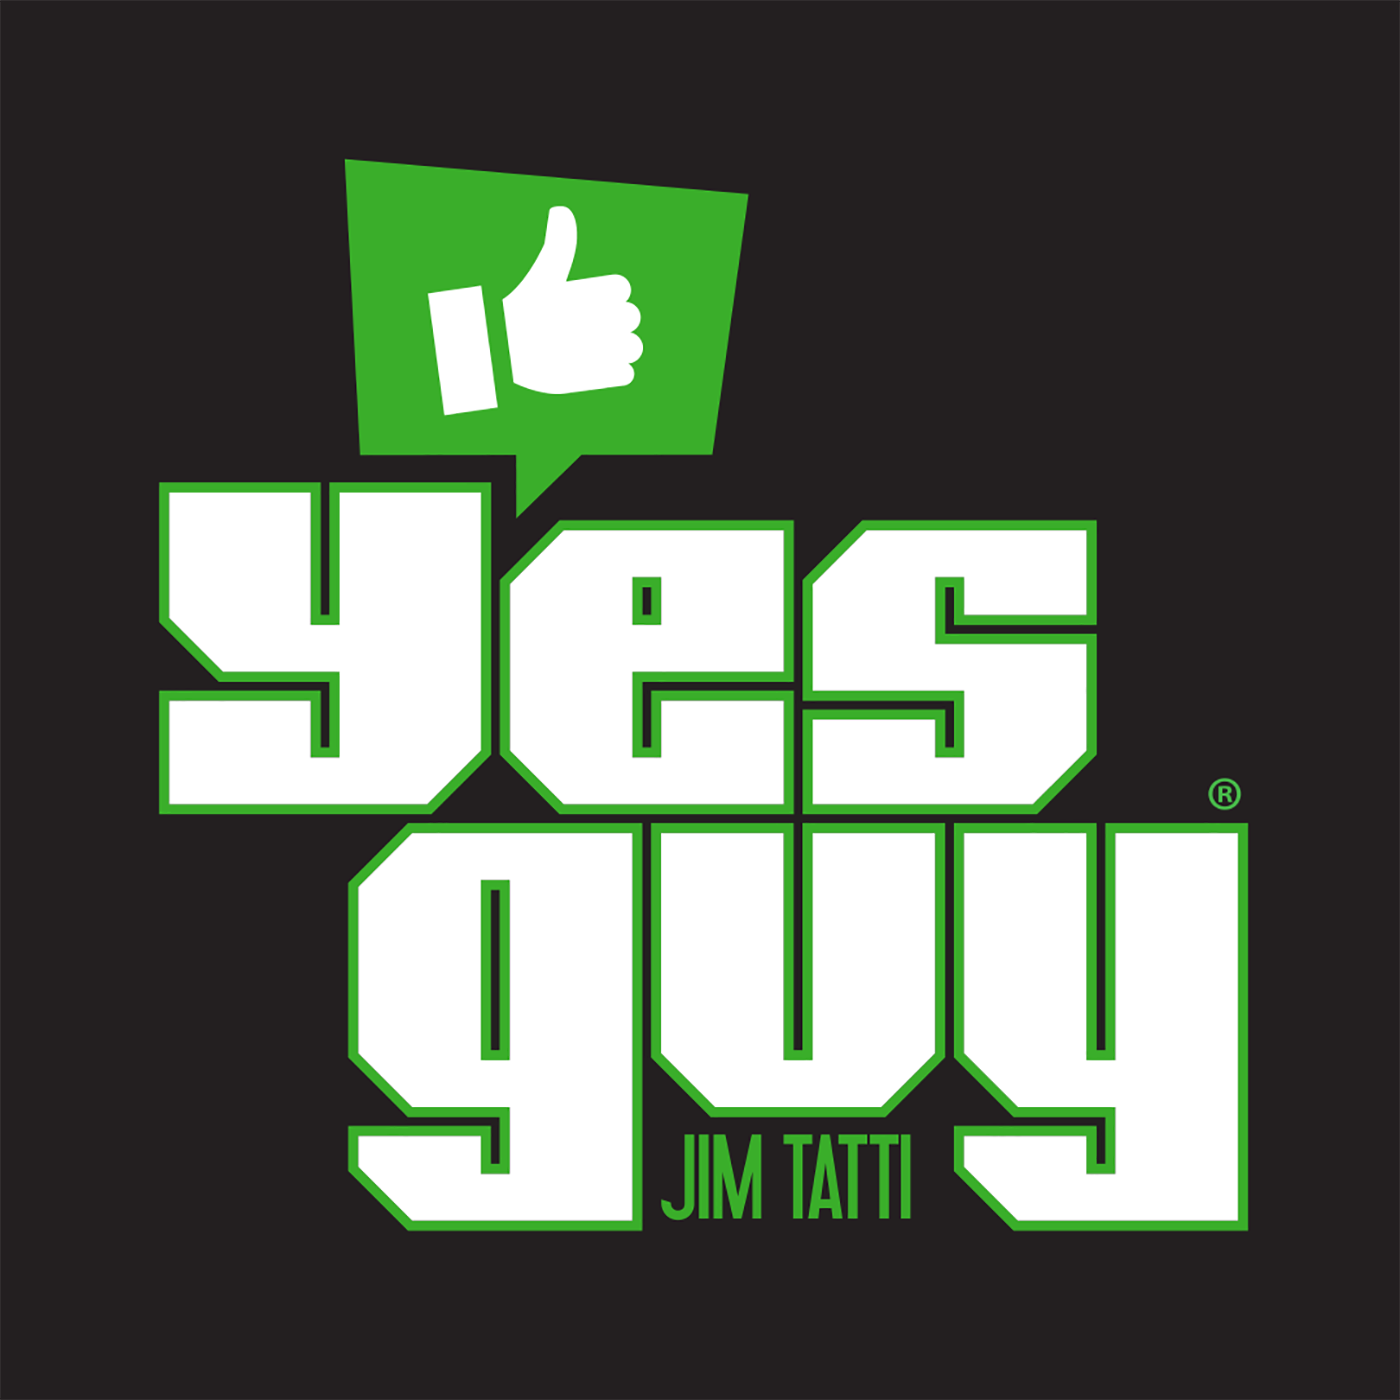 Yes Guy - March 8 - Episode 186